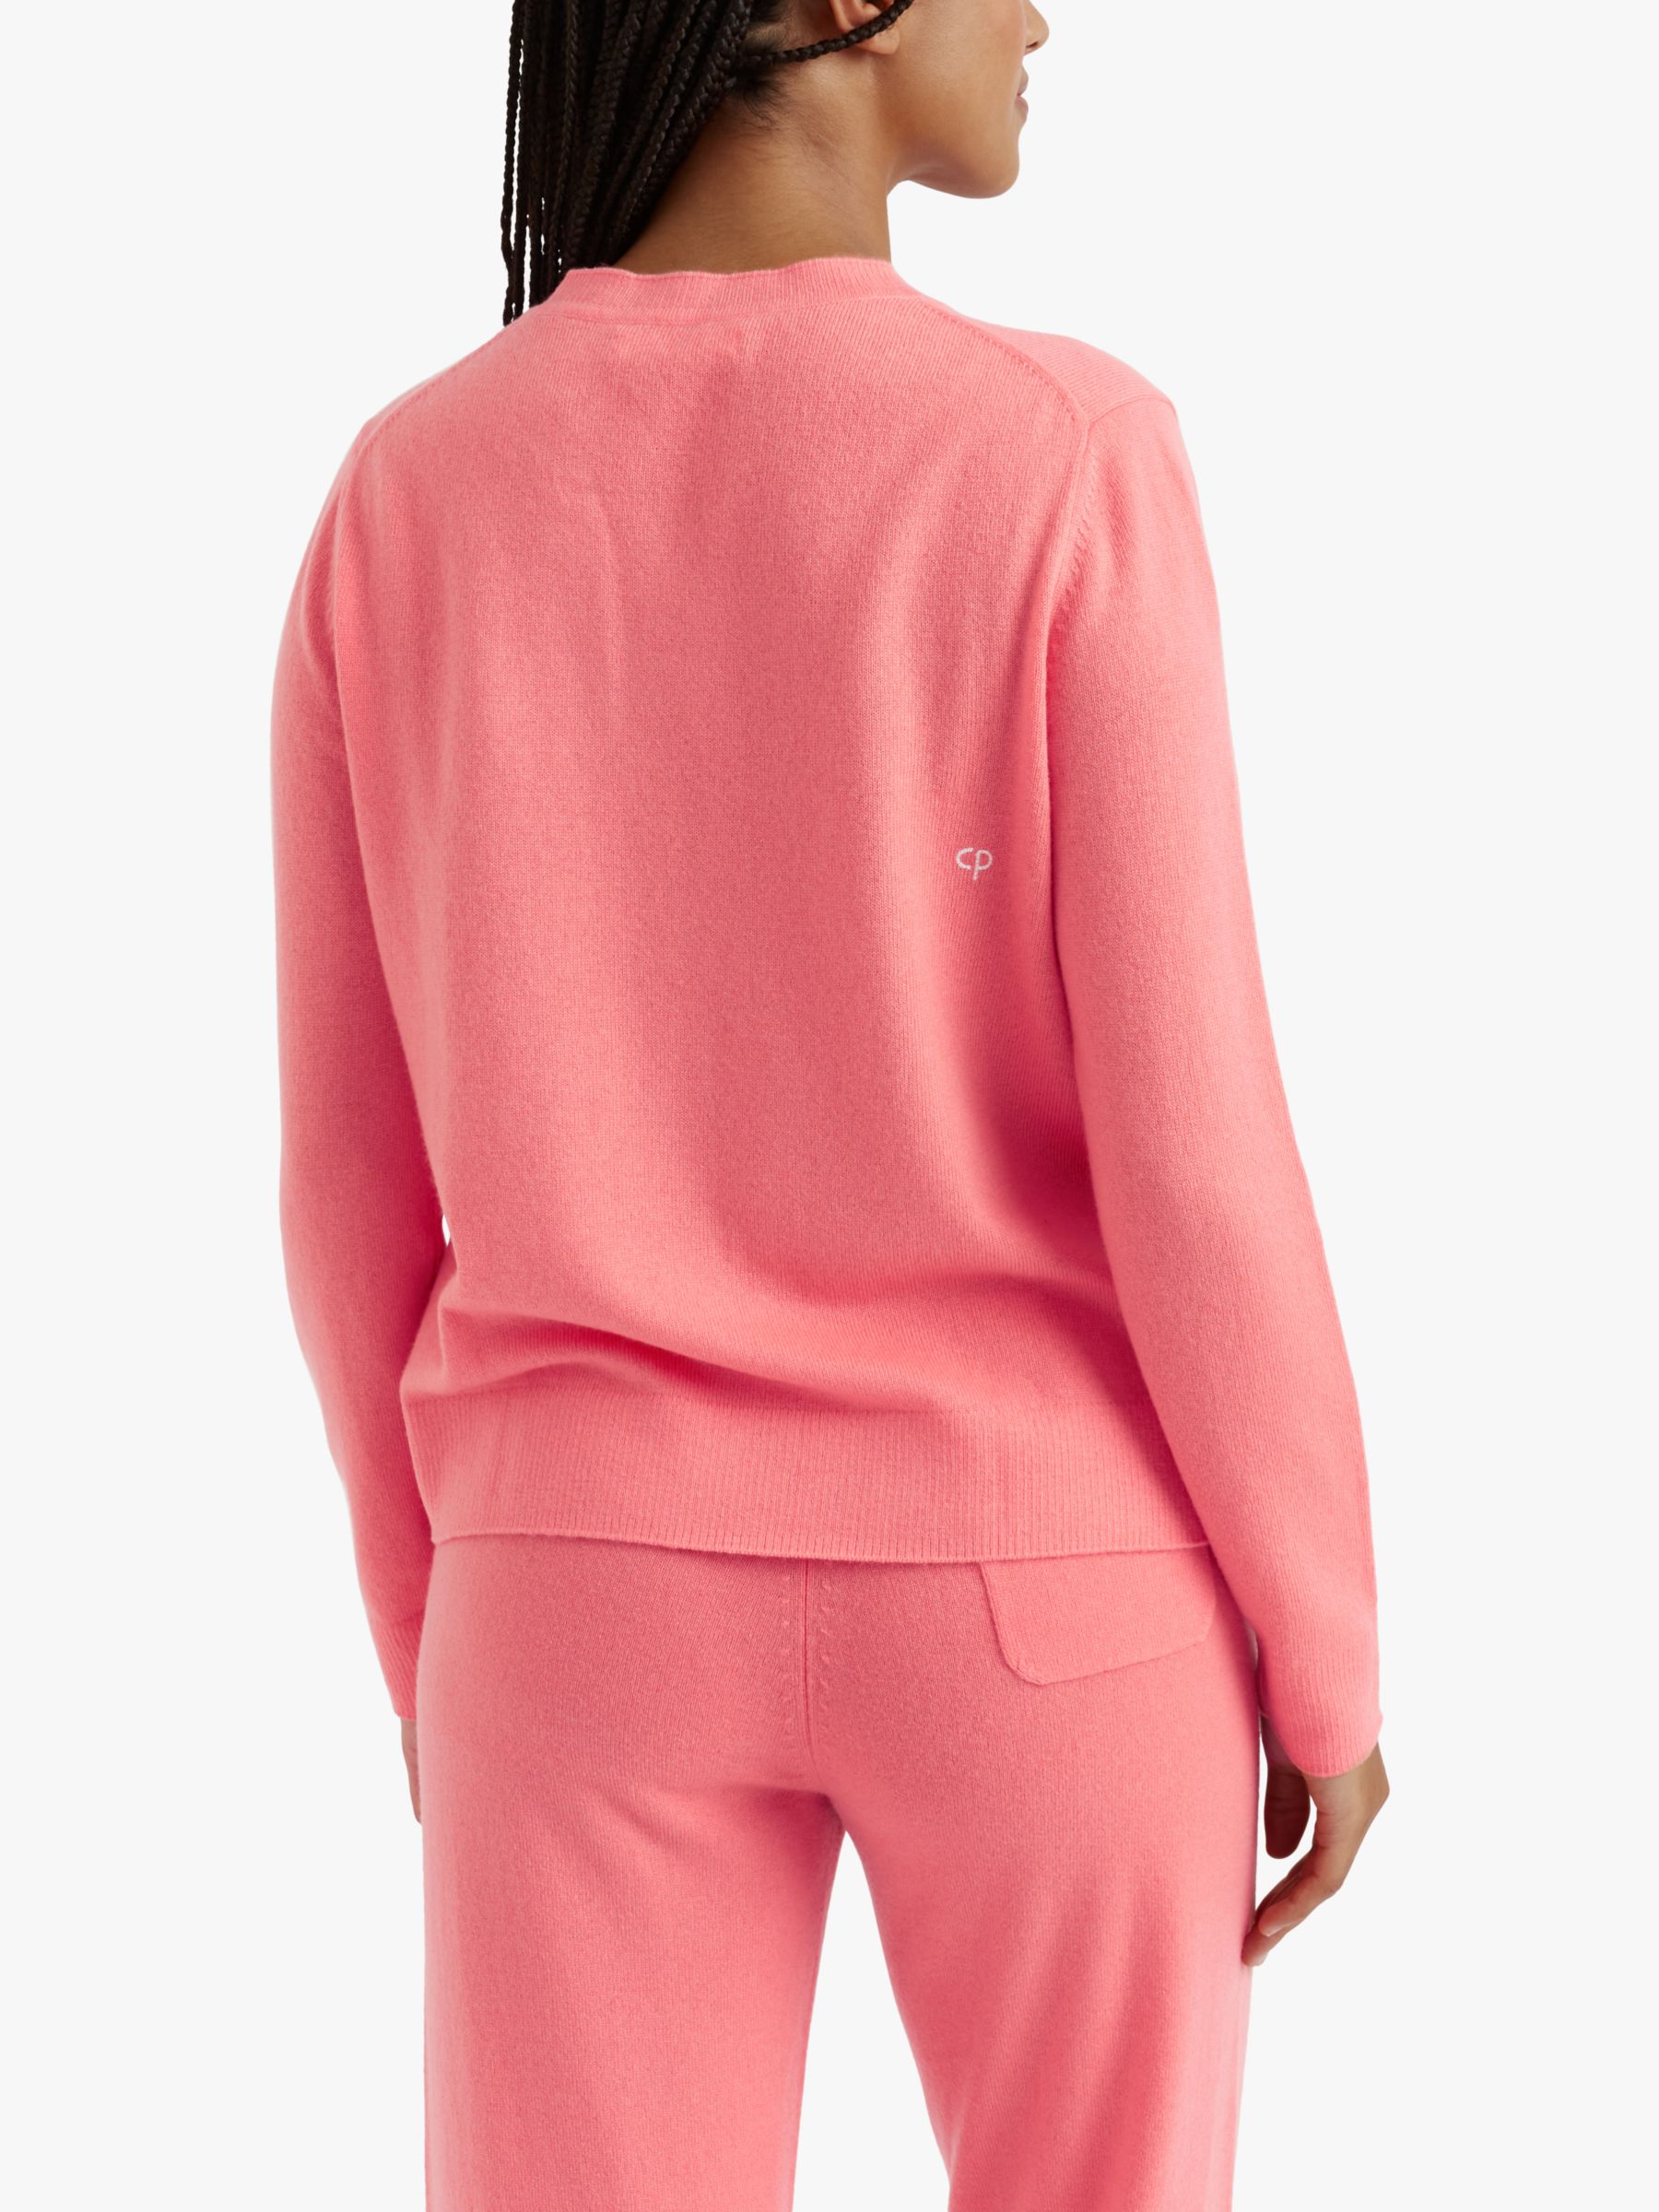 Buy Chinti & Parker Bloom Love Wool Cashmere Jumper, Living Coral Online at johnlewis.com